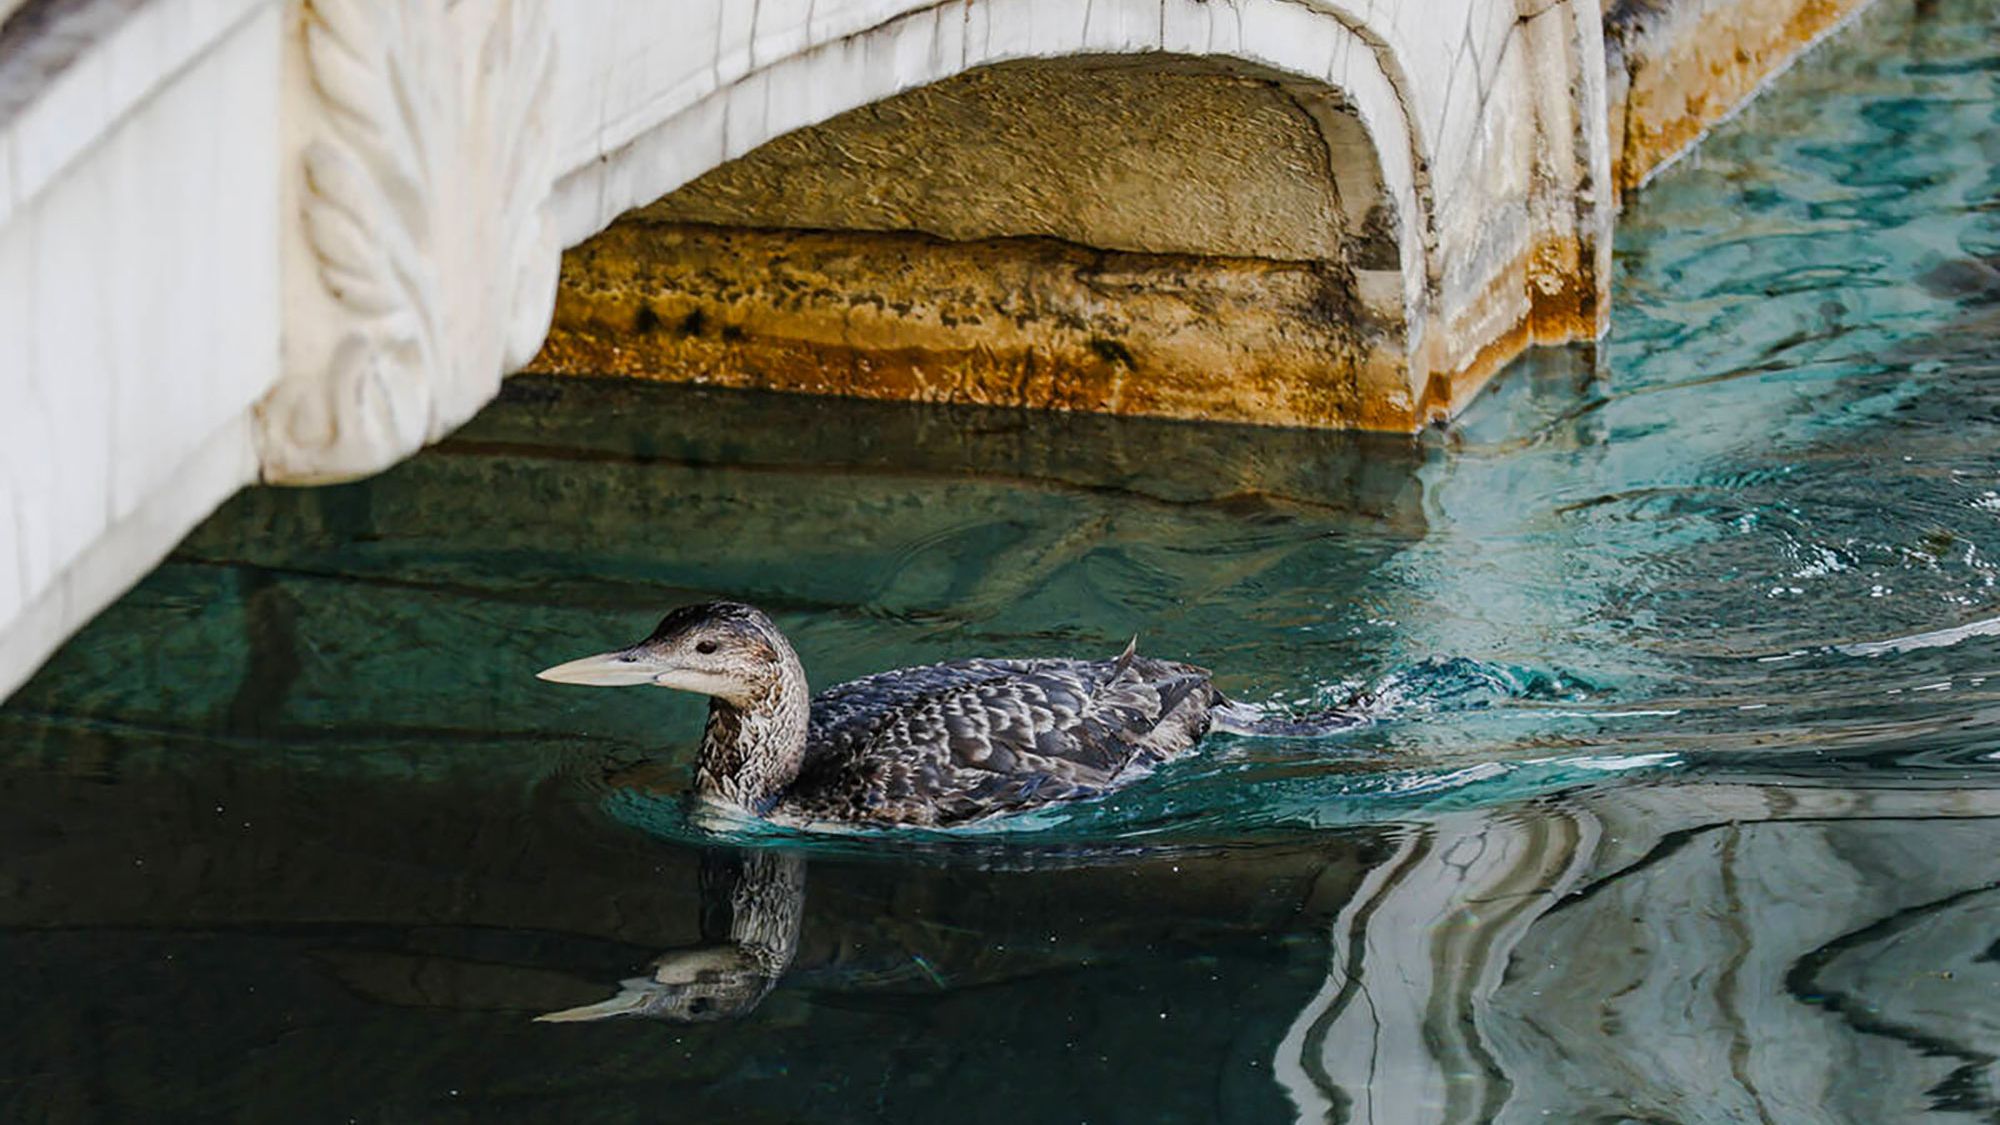 There was an unusual sighting of a Yellow-billed Loon in Lake Bellagio on the Las Vegas Strip on Tuesday.